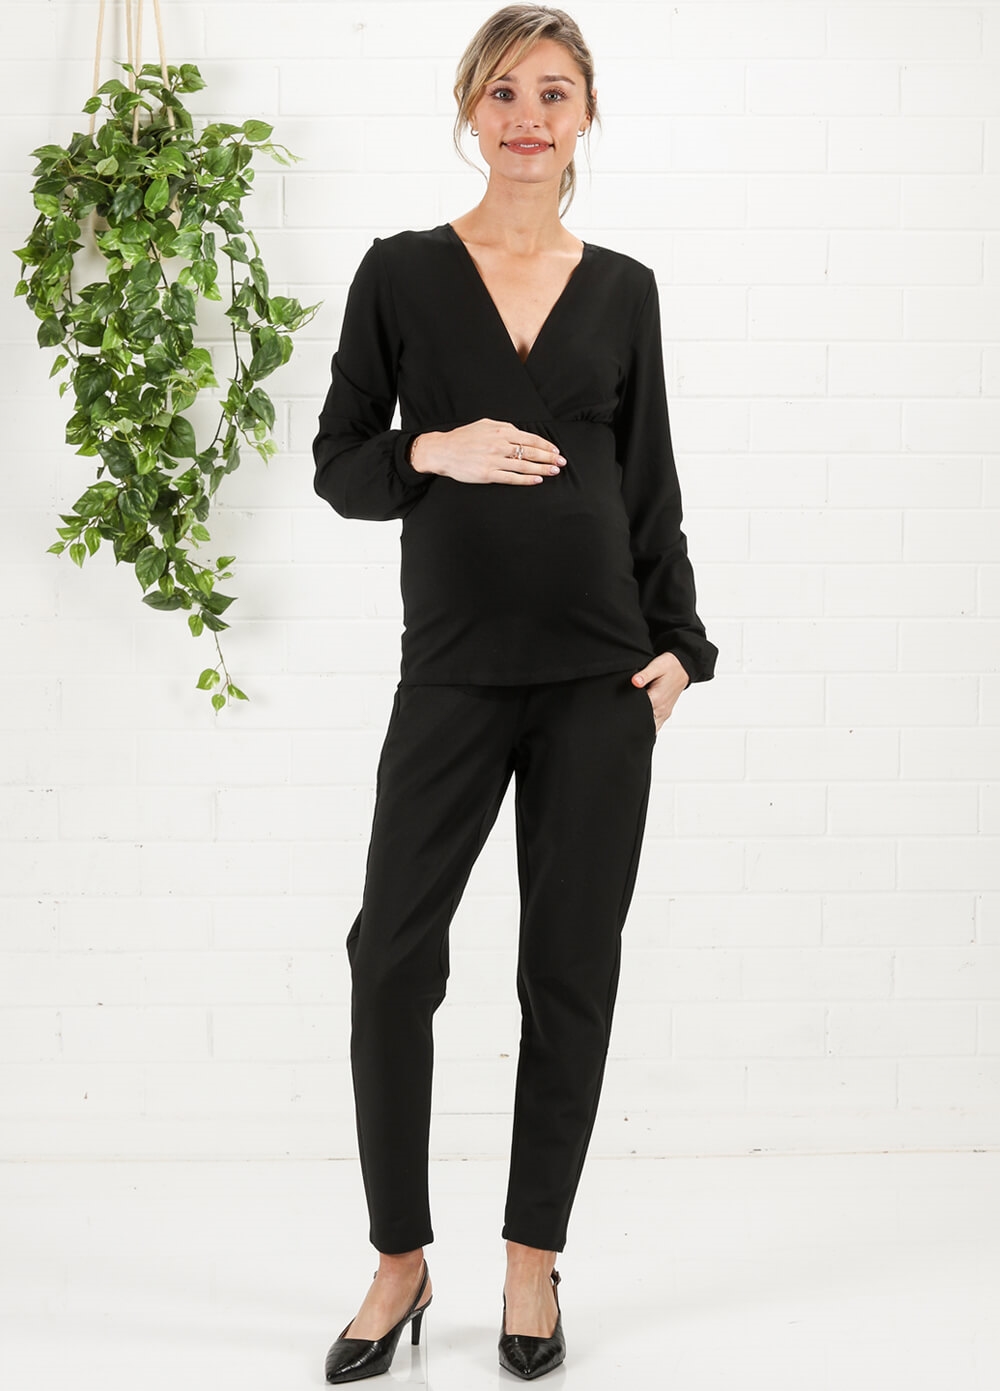 Puff Sleeve Maternity & Nursing Blouse in Black by Queen mum